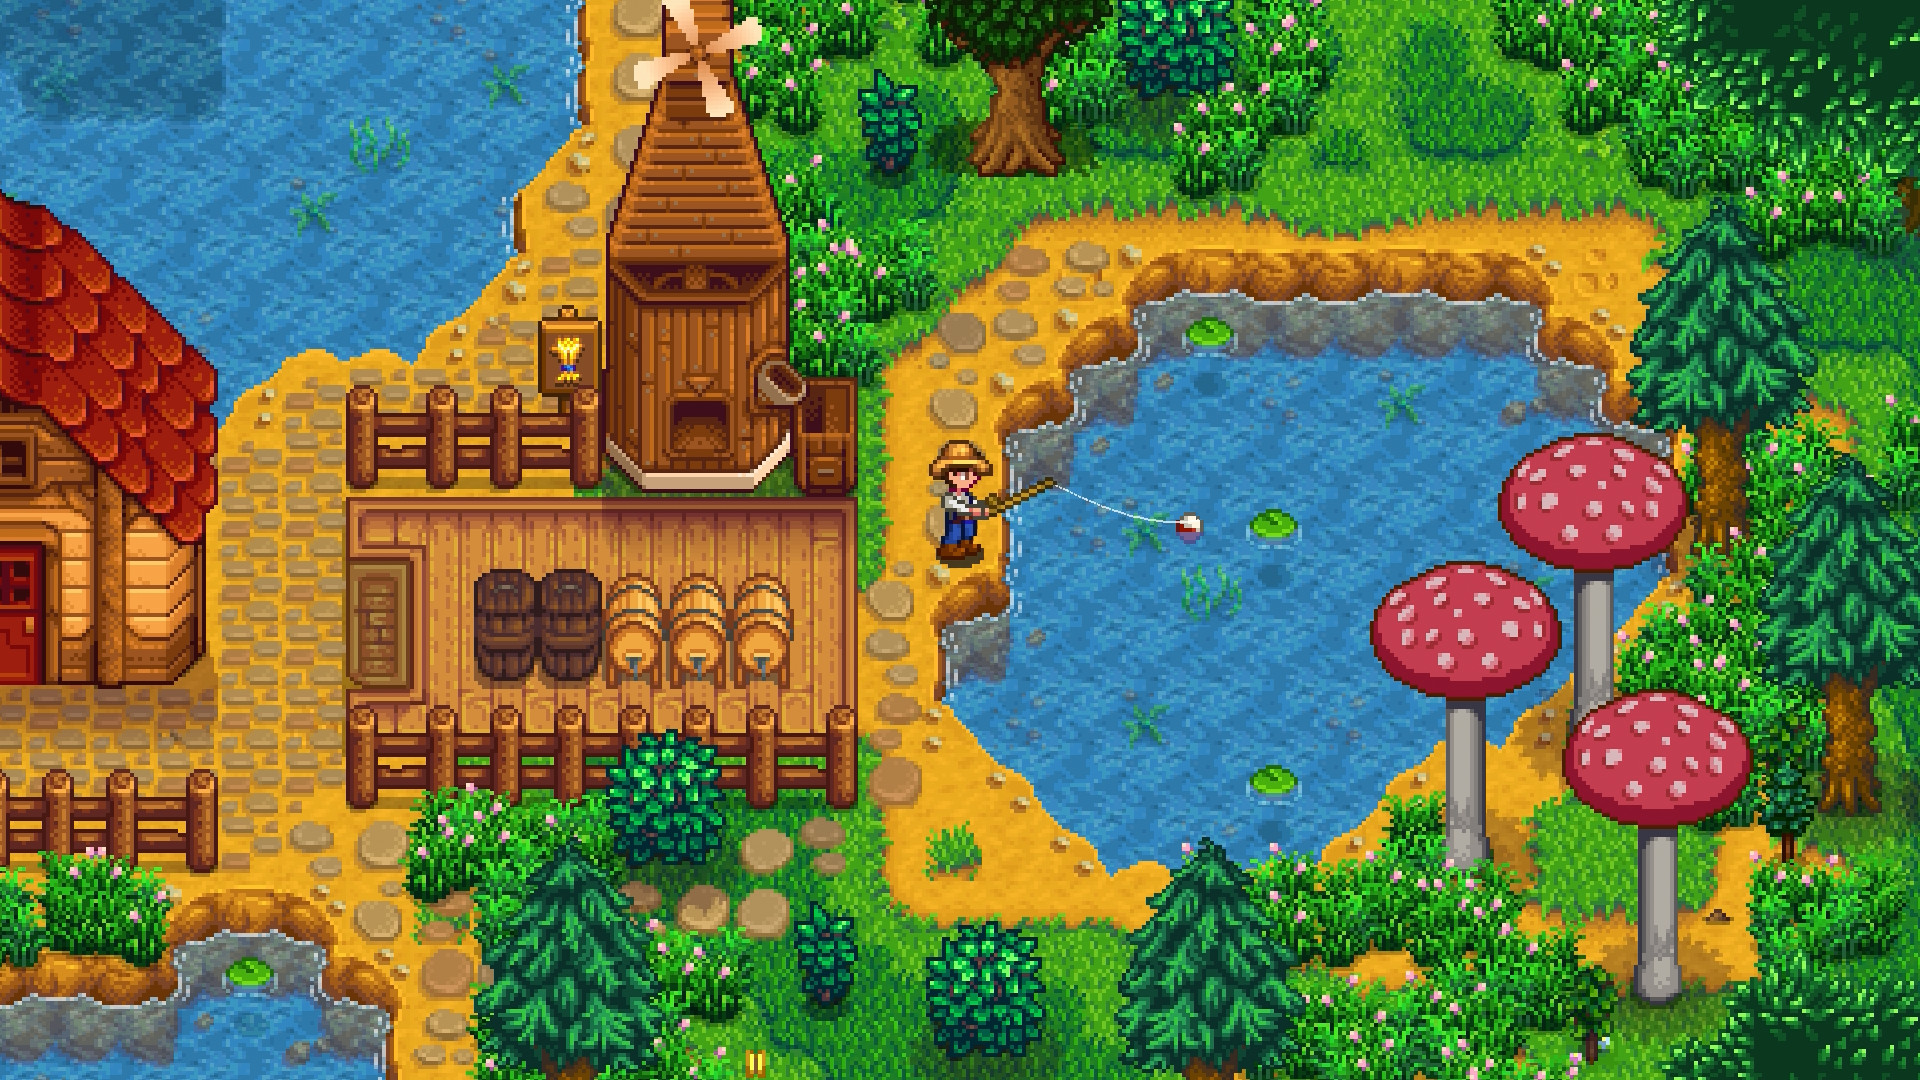 Stardew Valley for PC - How to Play